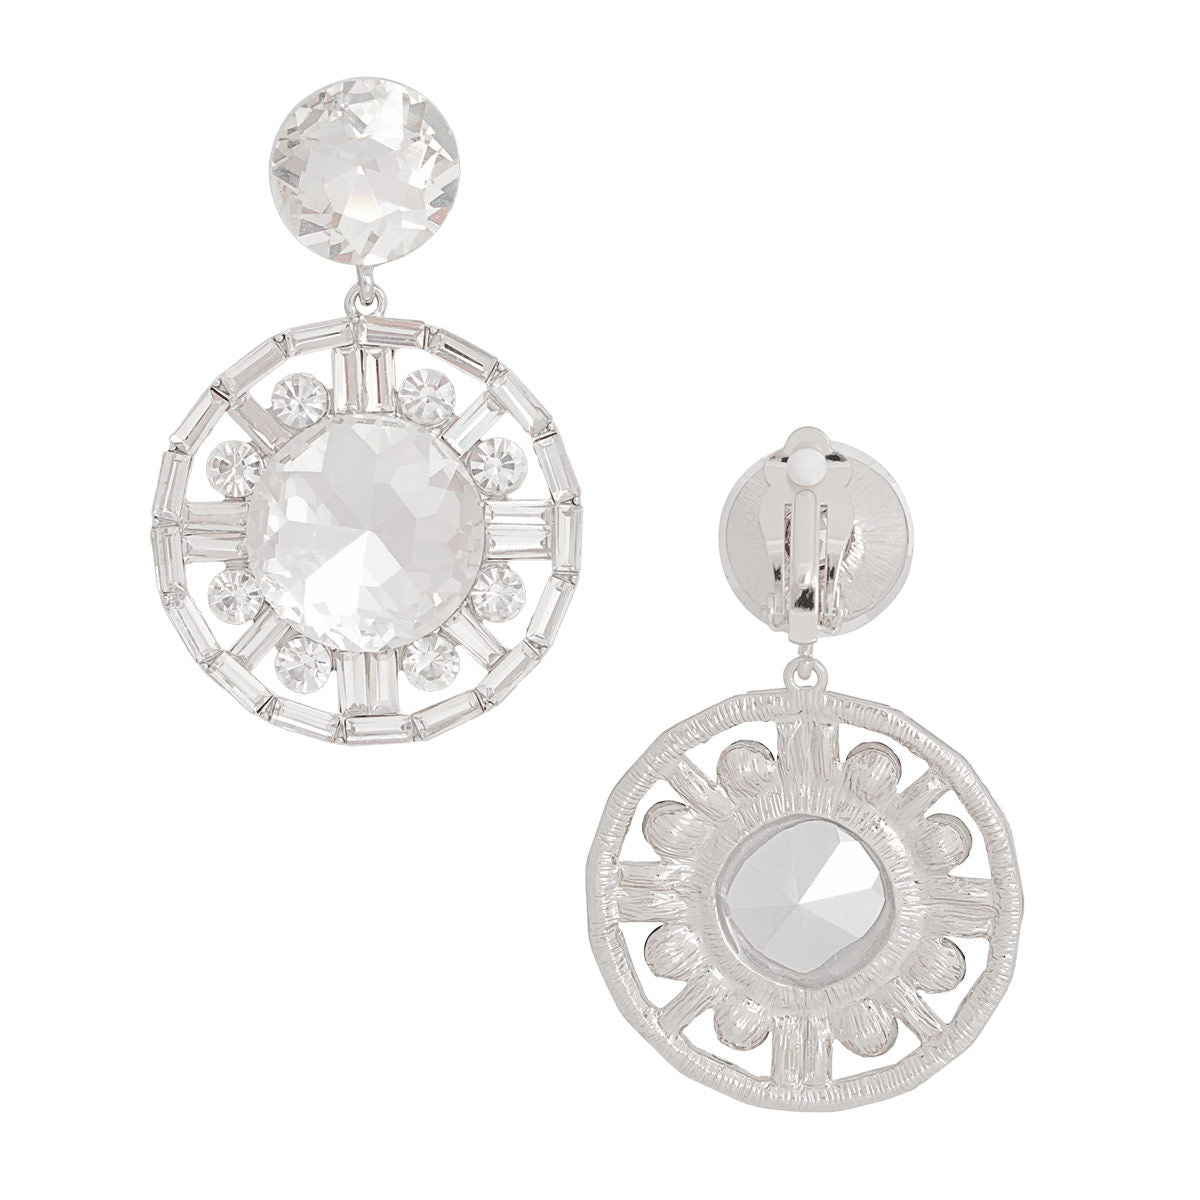 Clip On Large Silver Crystal Round Drop Earrings